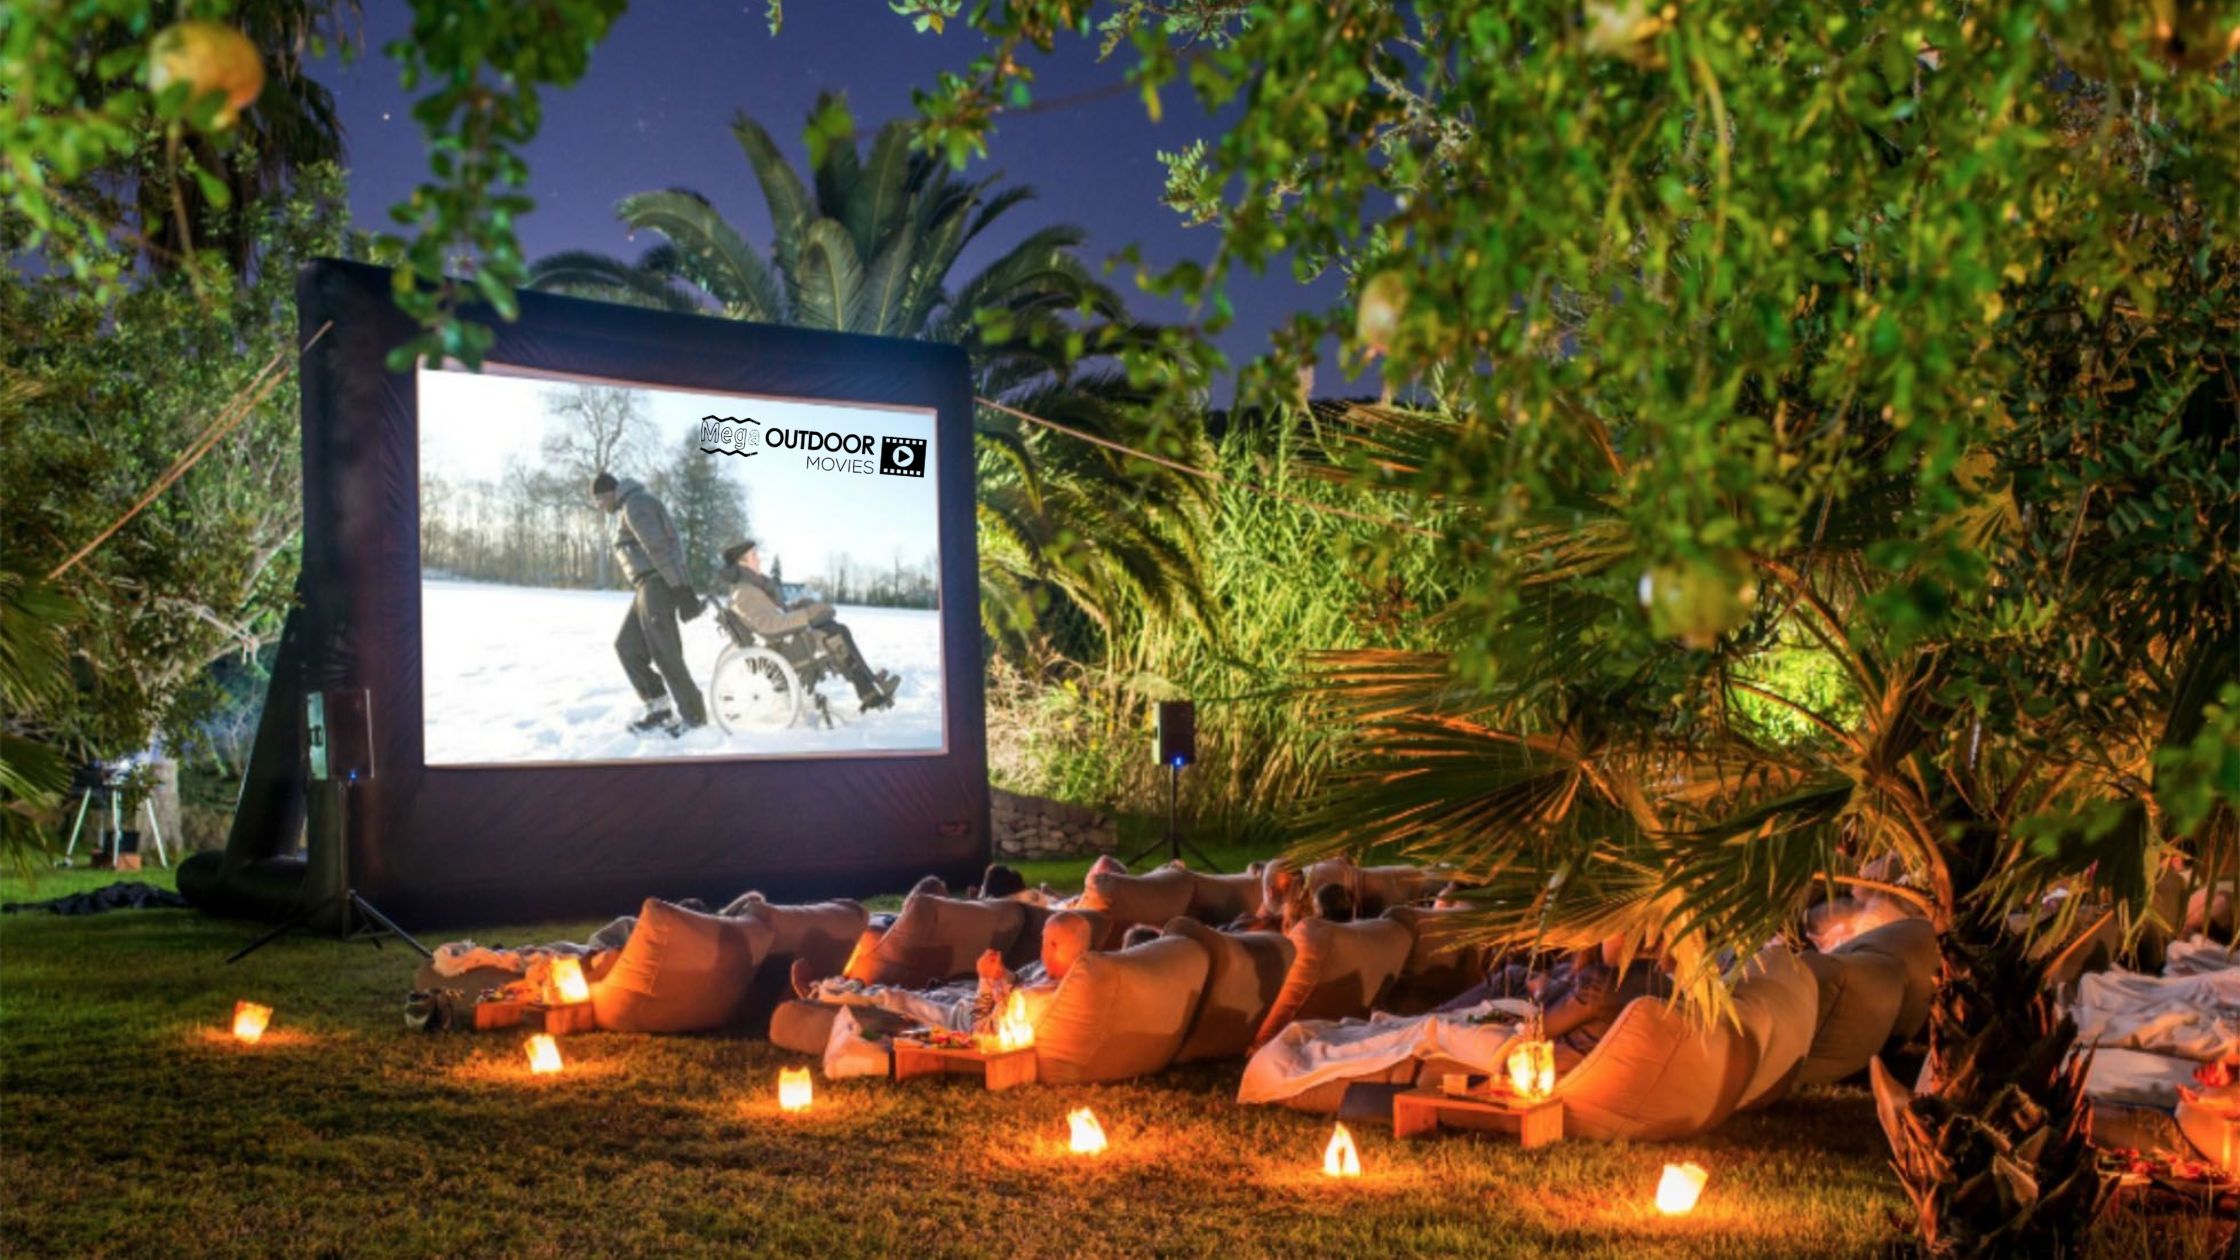 Bringing Back the Magic: The Return of Drive-In Movies to Your Backyard